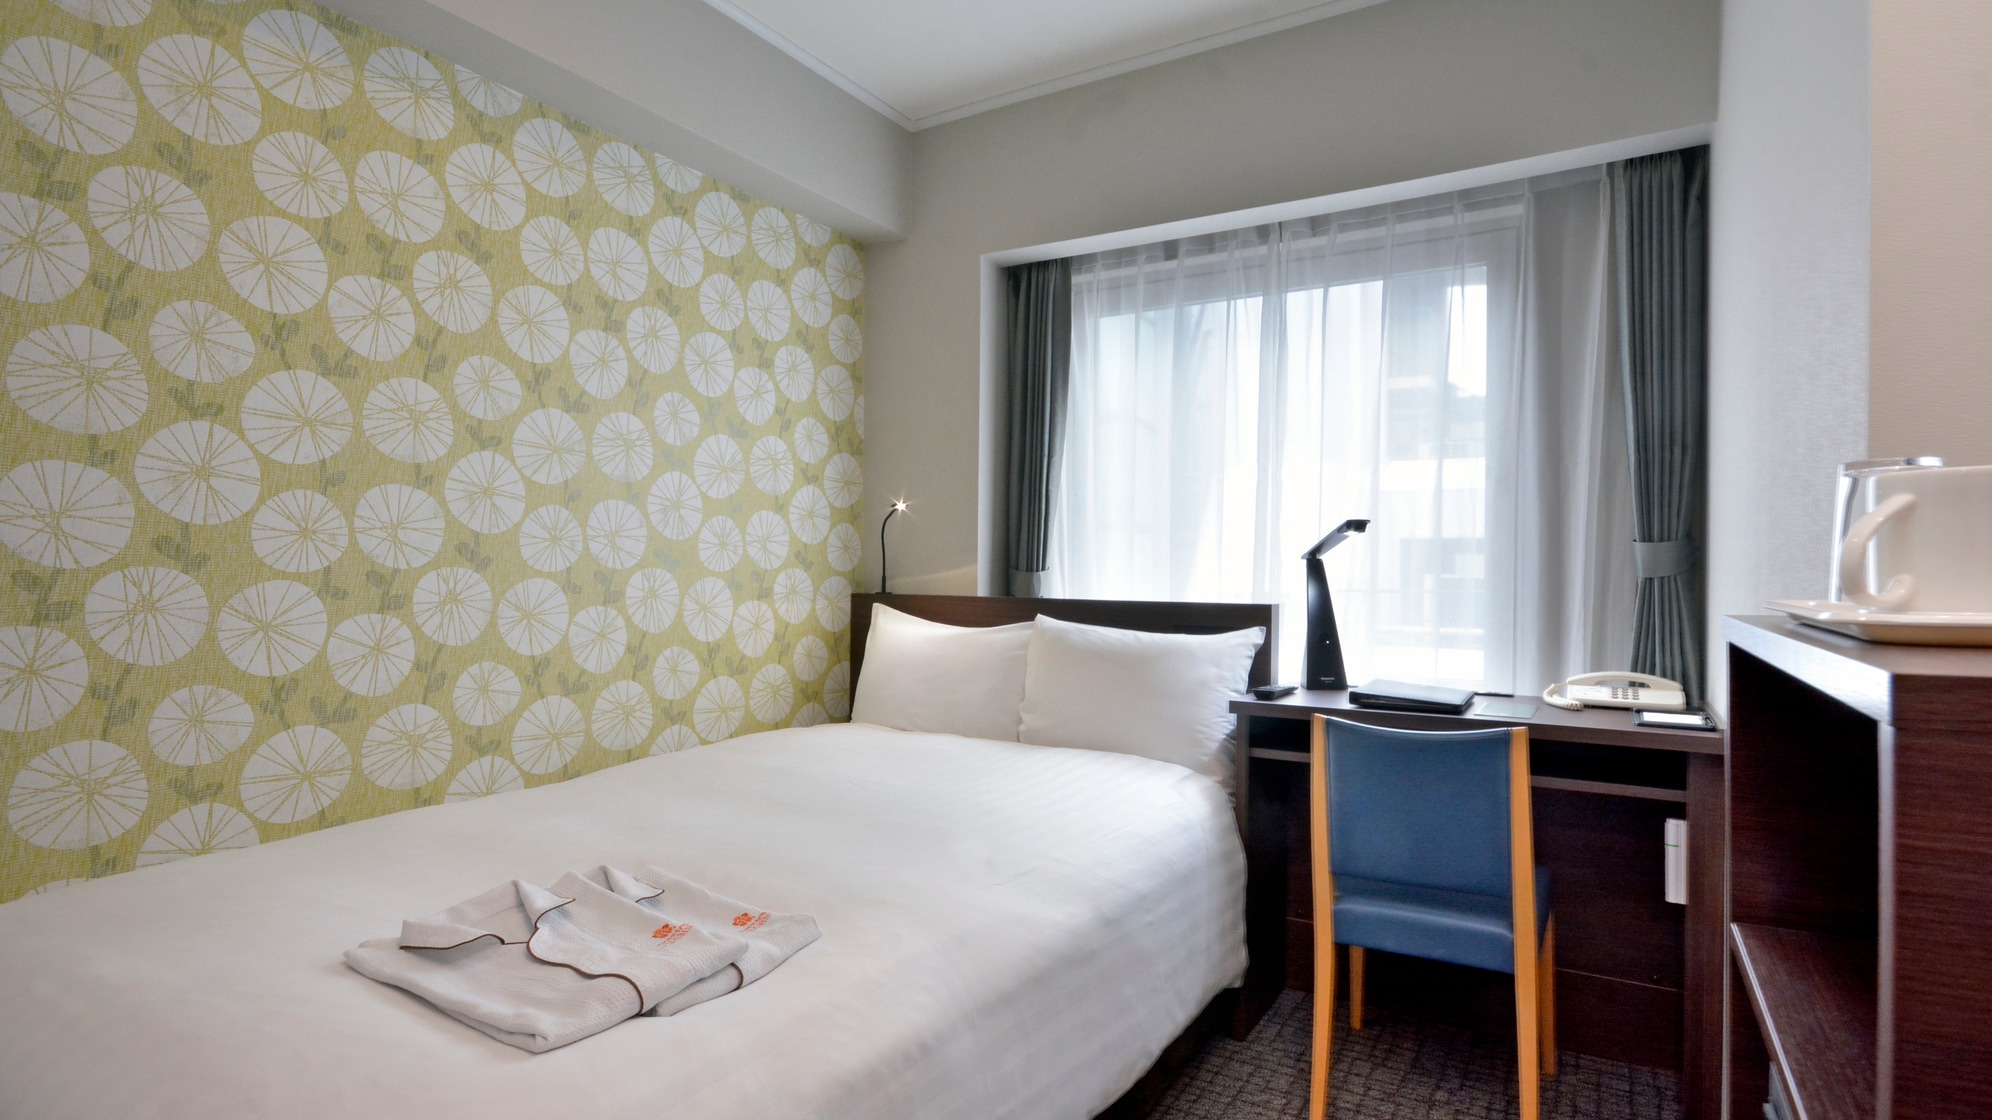 ★ All guest rooms renewed in July 2019 ★ [Non-smoking] Semi-double room